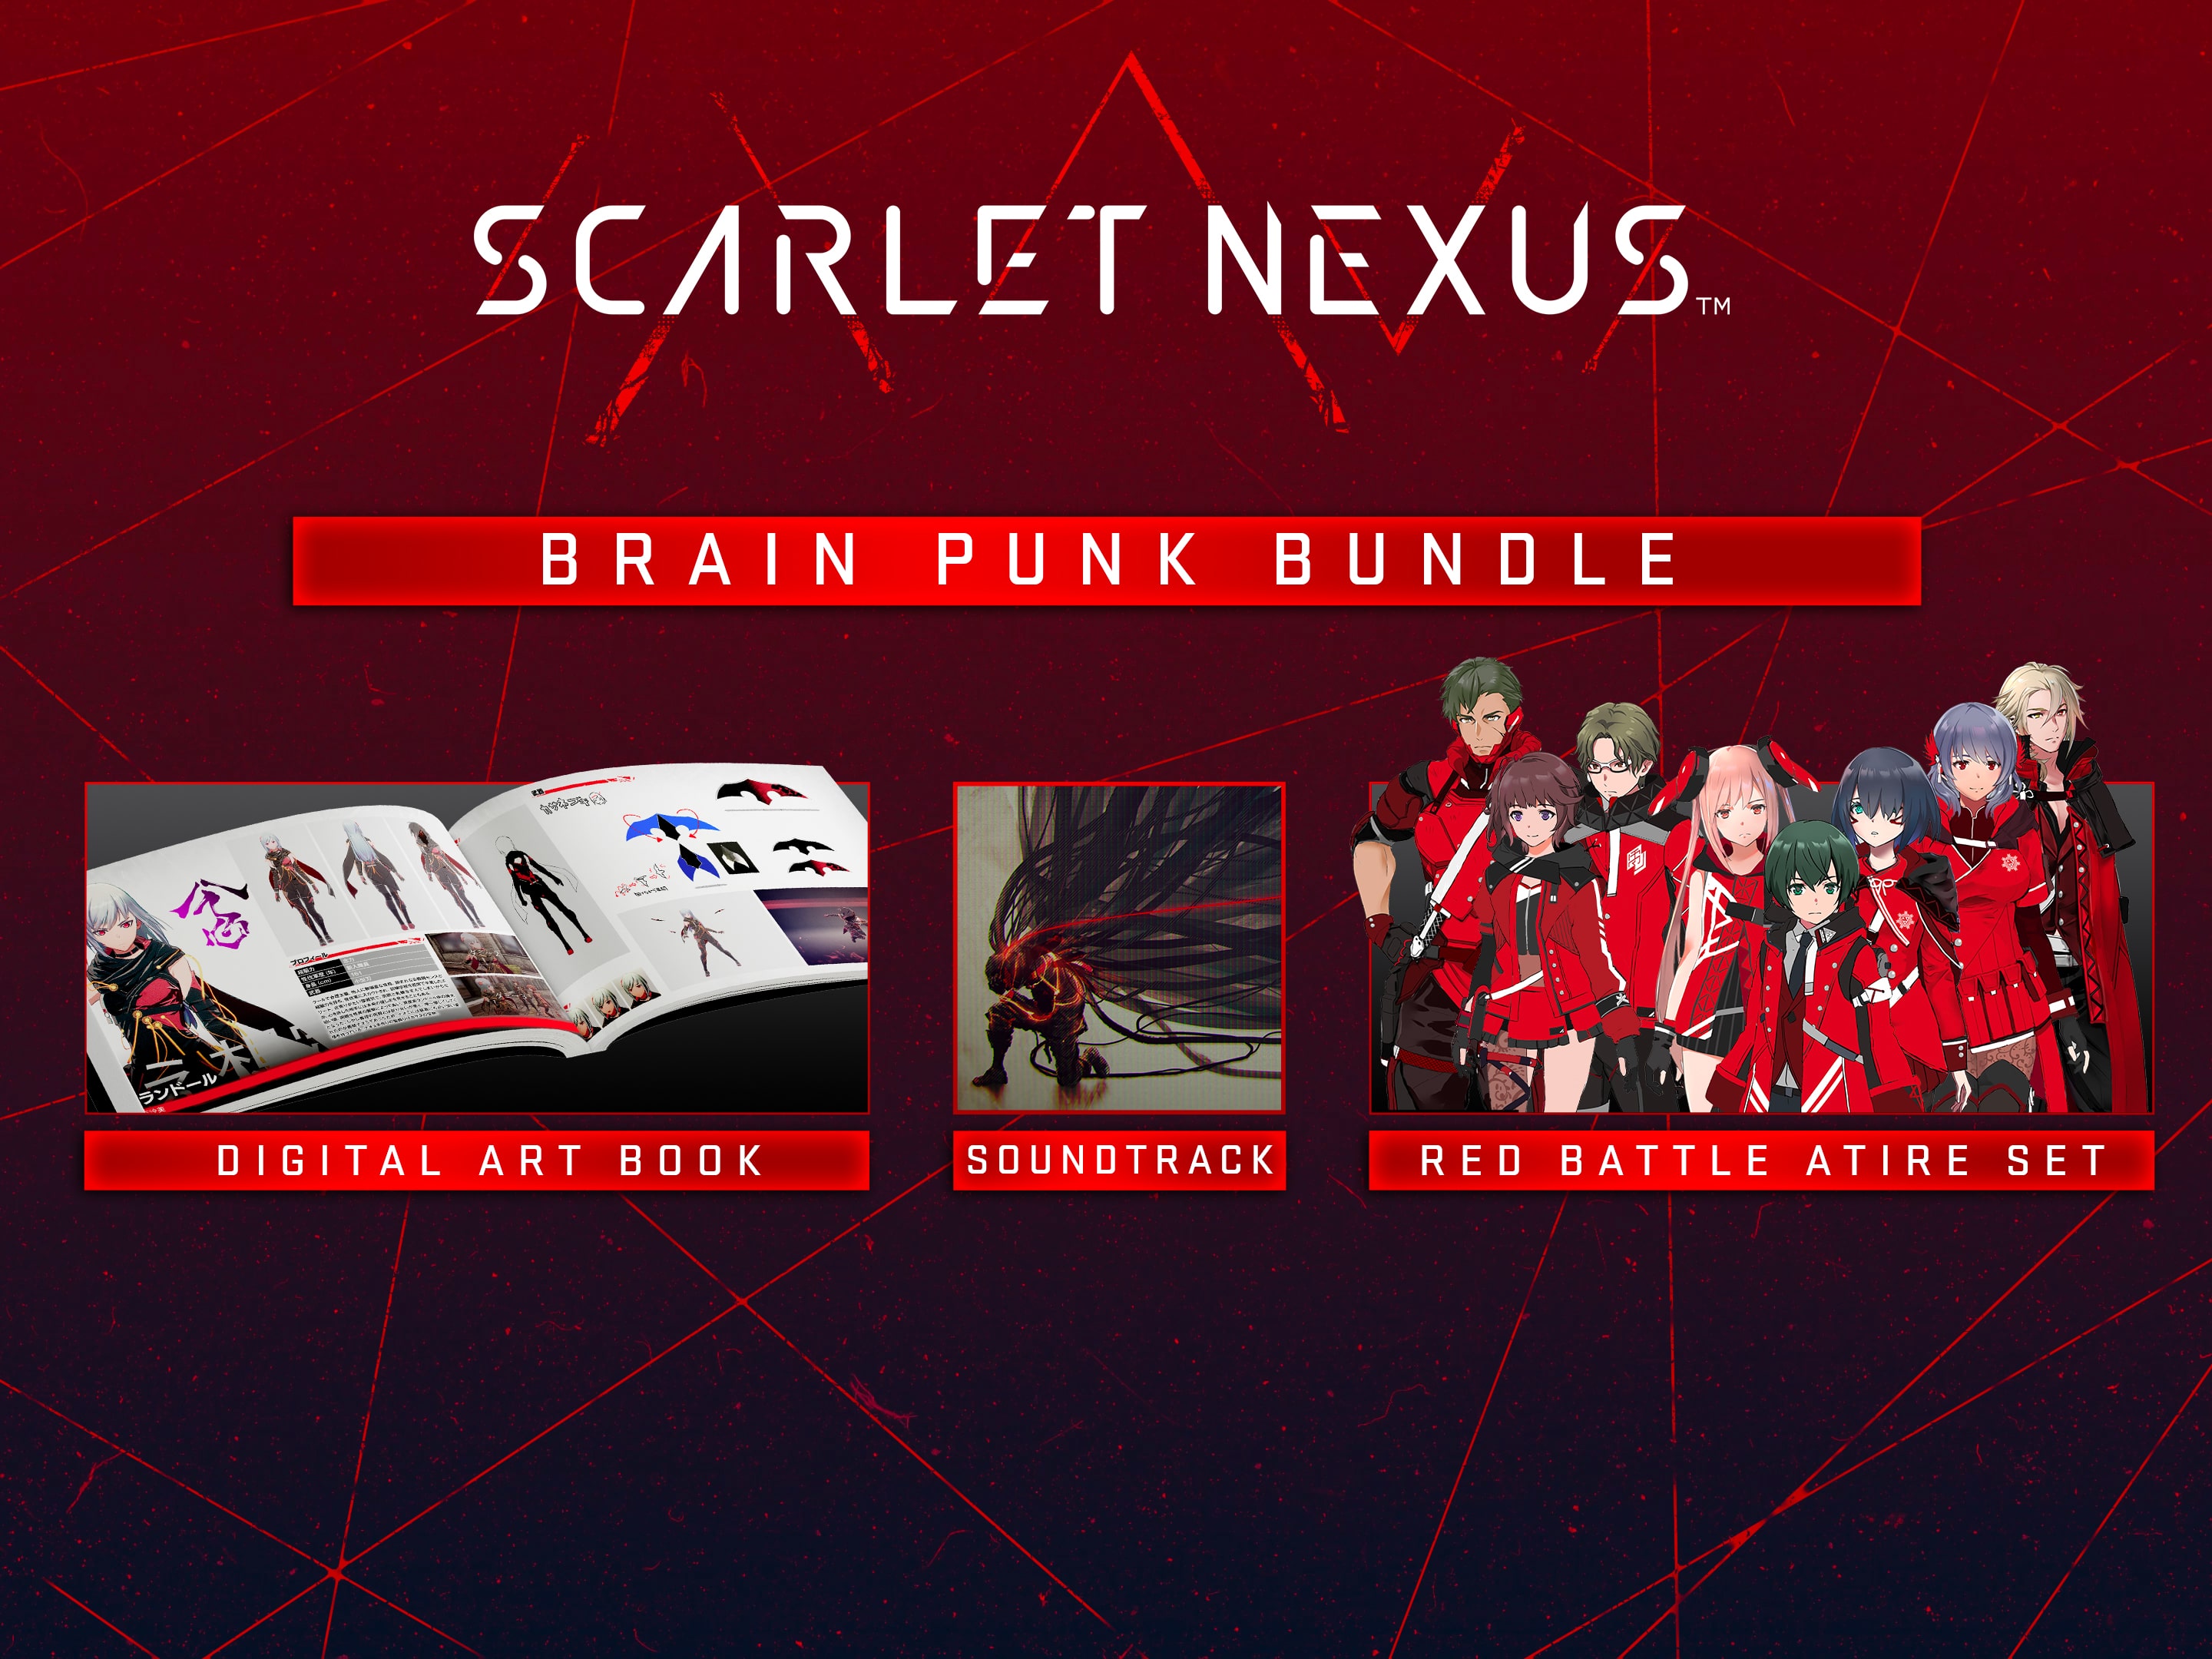 Scarlet Nexus is a 'brain punk' action game with some freakish